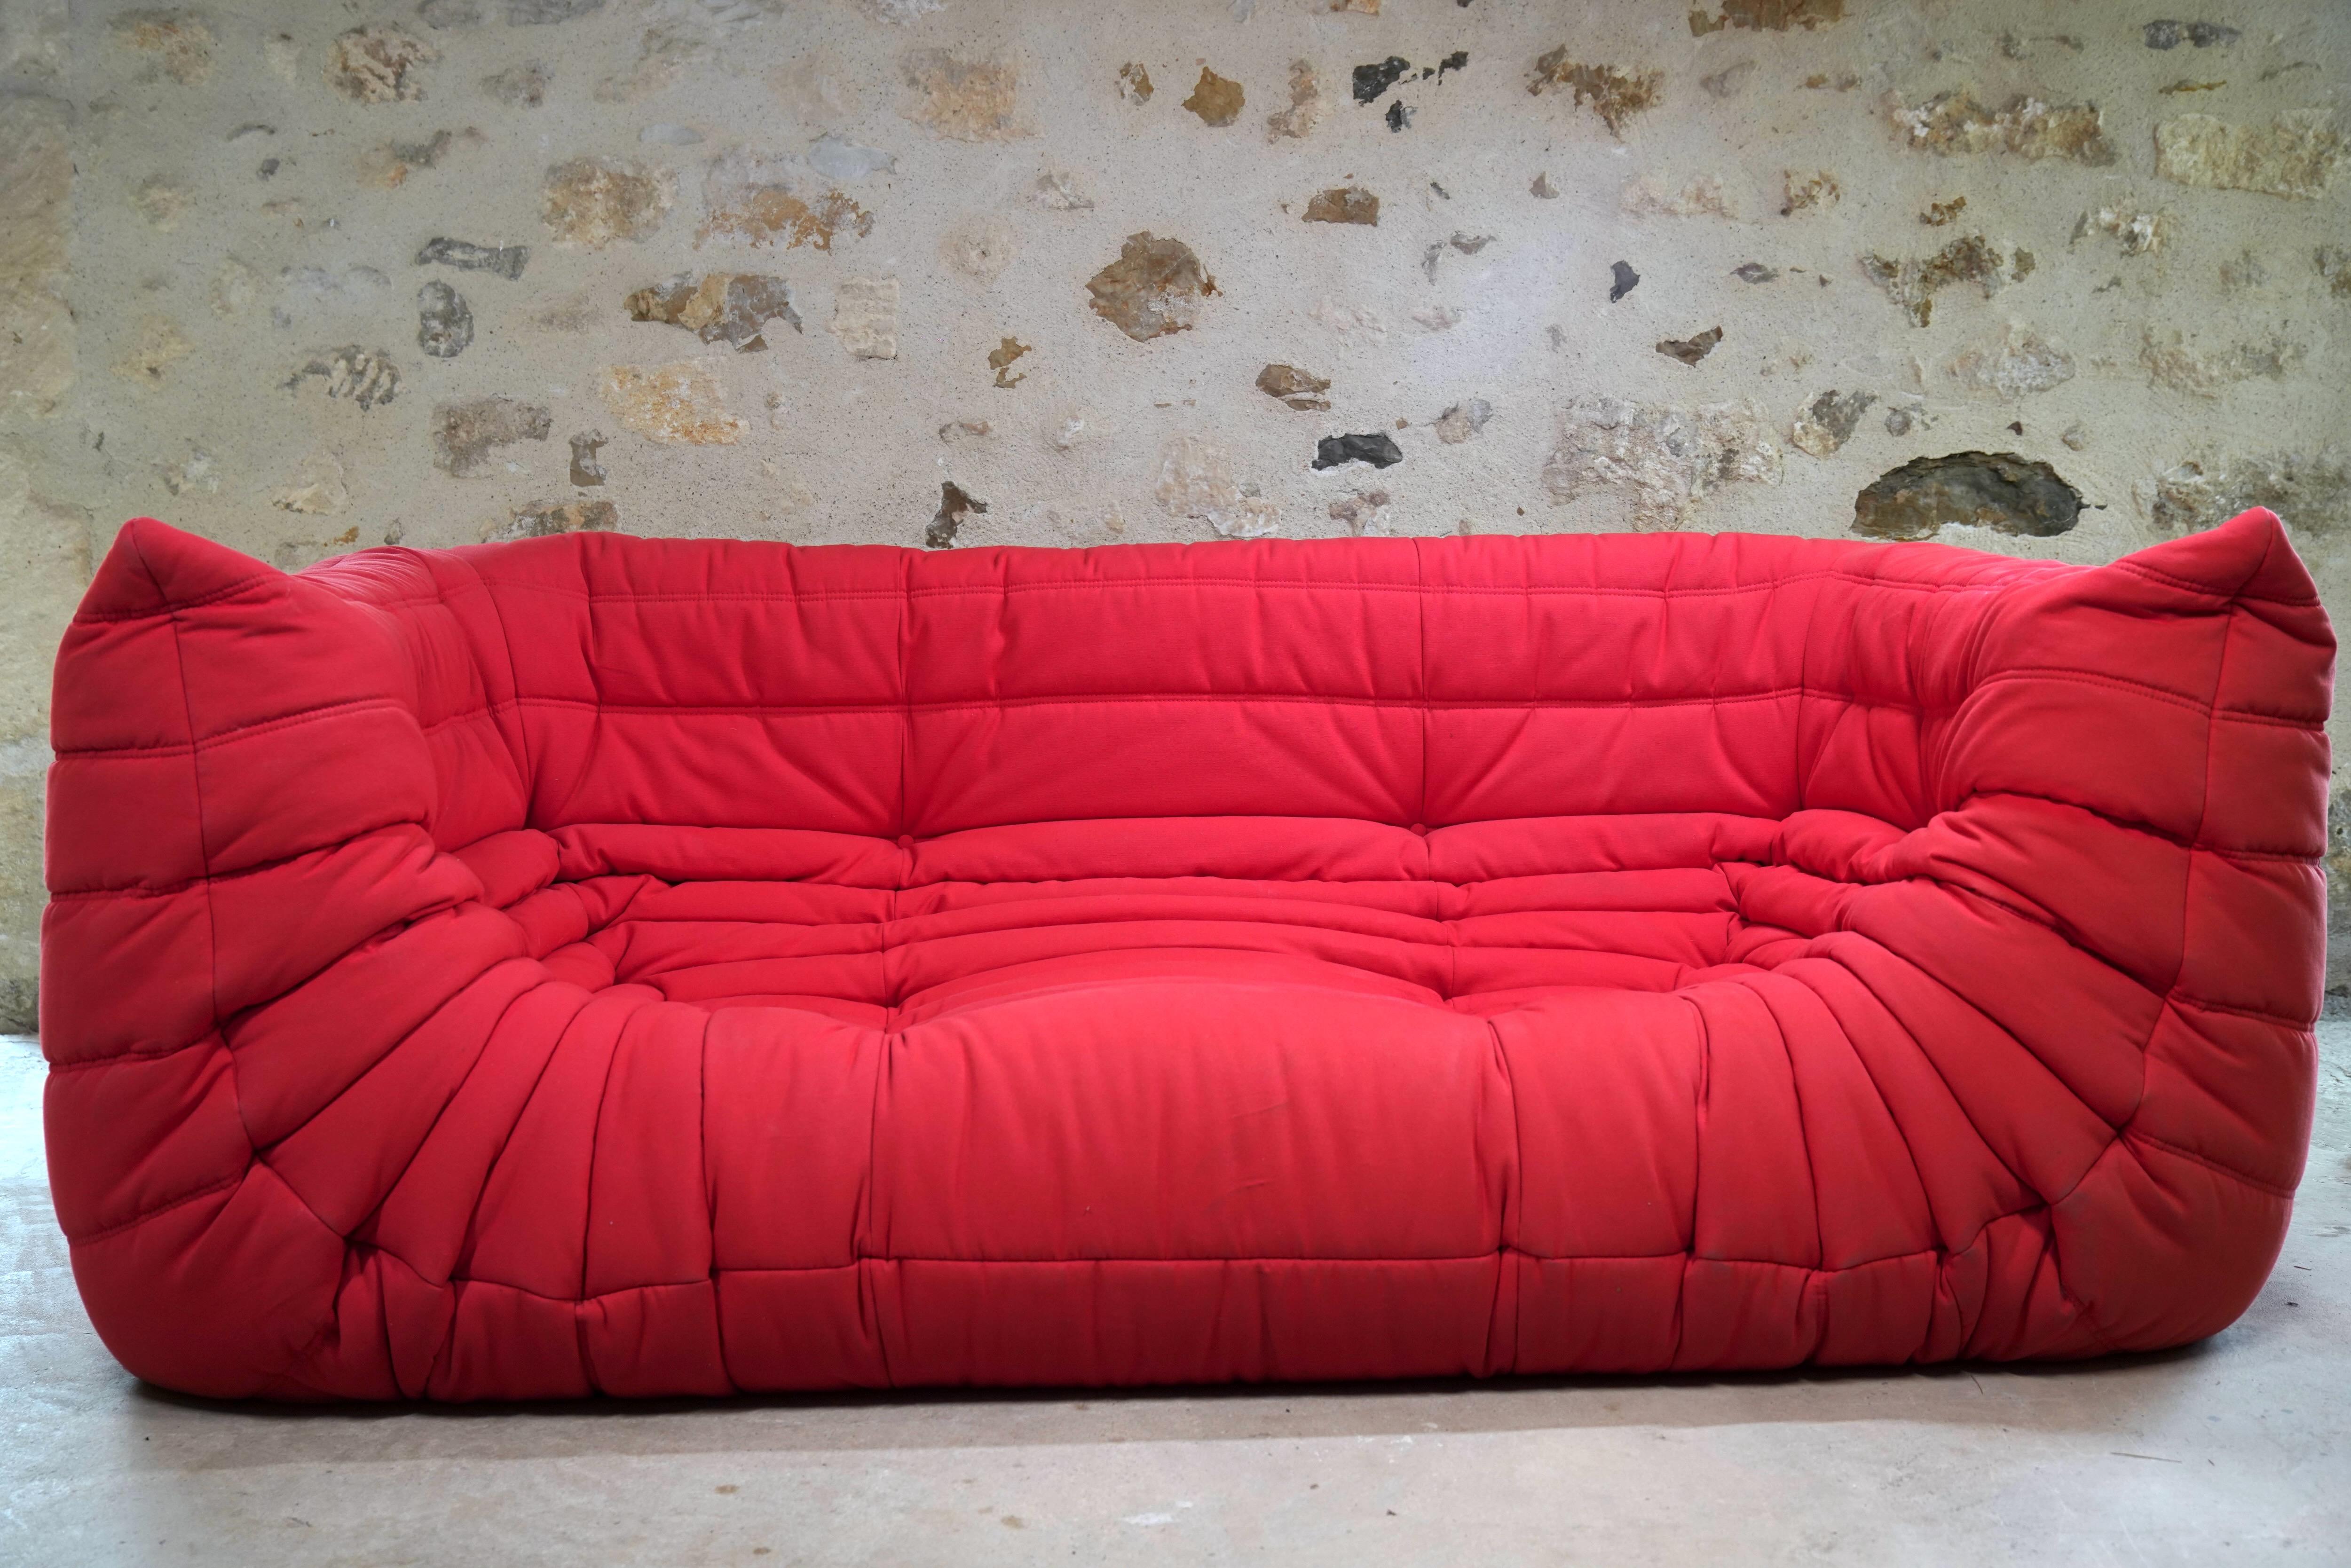 Gorgeous three-seater red Alcantara Togo sofa designed by Michel Ducaroy for Ligne Roset from 2006.

Designer Michel Ducaroy drew inspiration for the Togo's design from an aluminum toothpaste tube noticing it “folded back on itself like a stovepipe